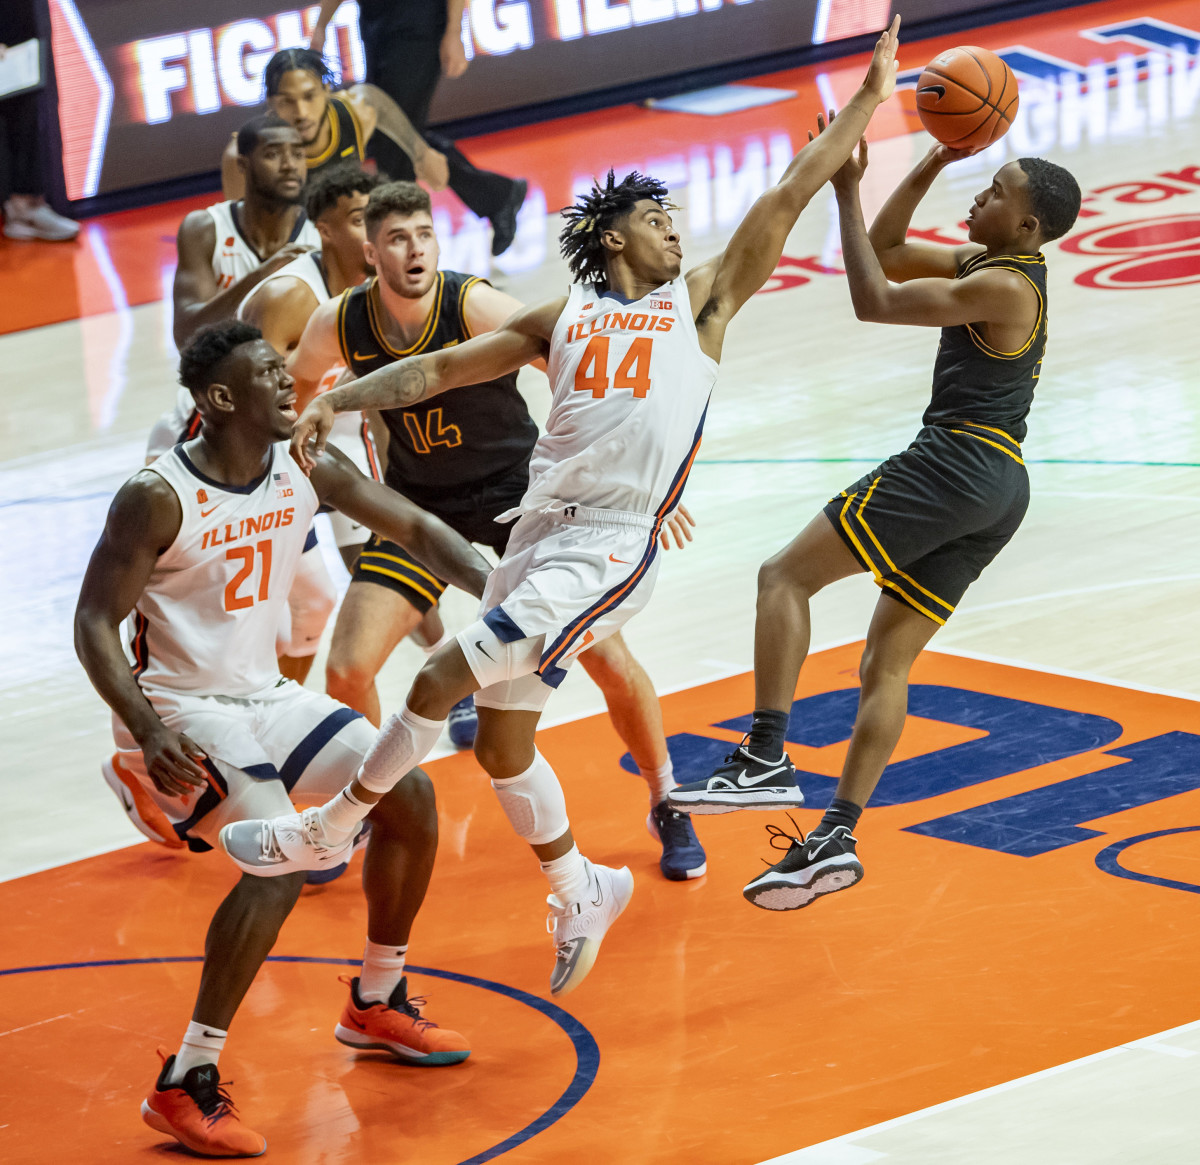 North Carolina A&T Aggies guard Fred Cleveland Jr. (right) goes up for a shot as Illinois Fighting Illini guard Adam Miller (44) defends during the first half at the State Farm Center.